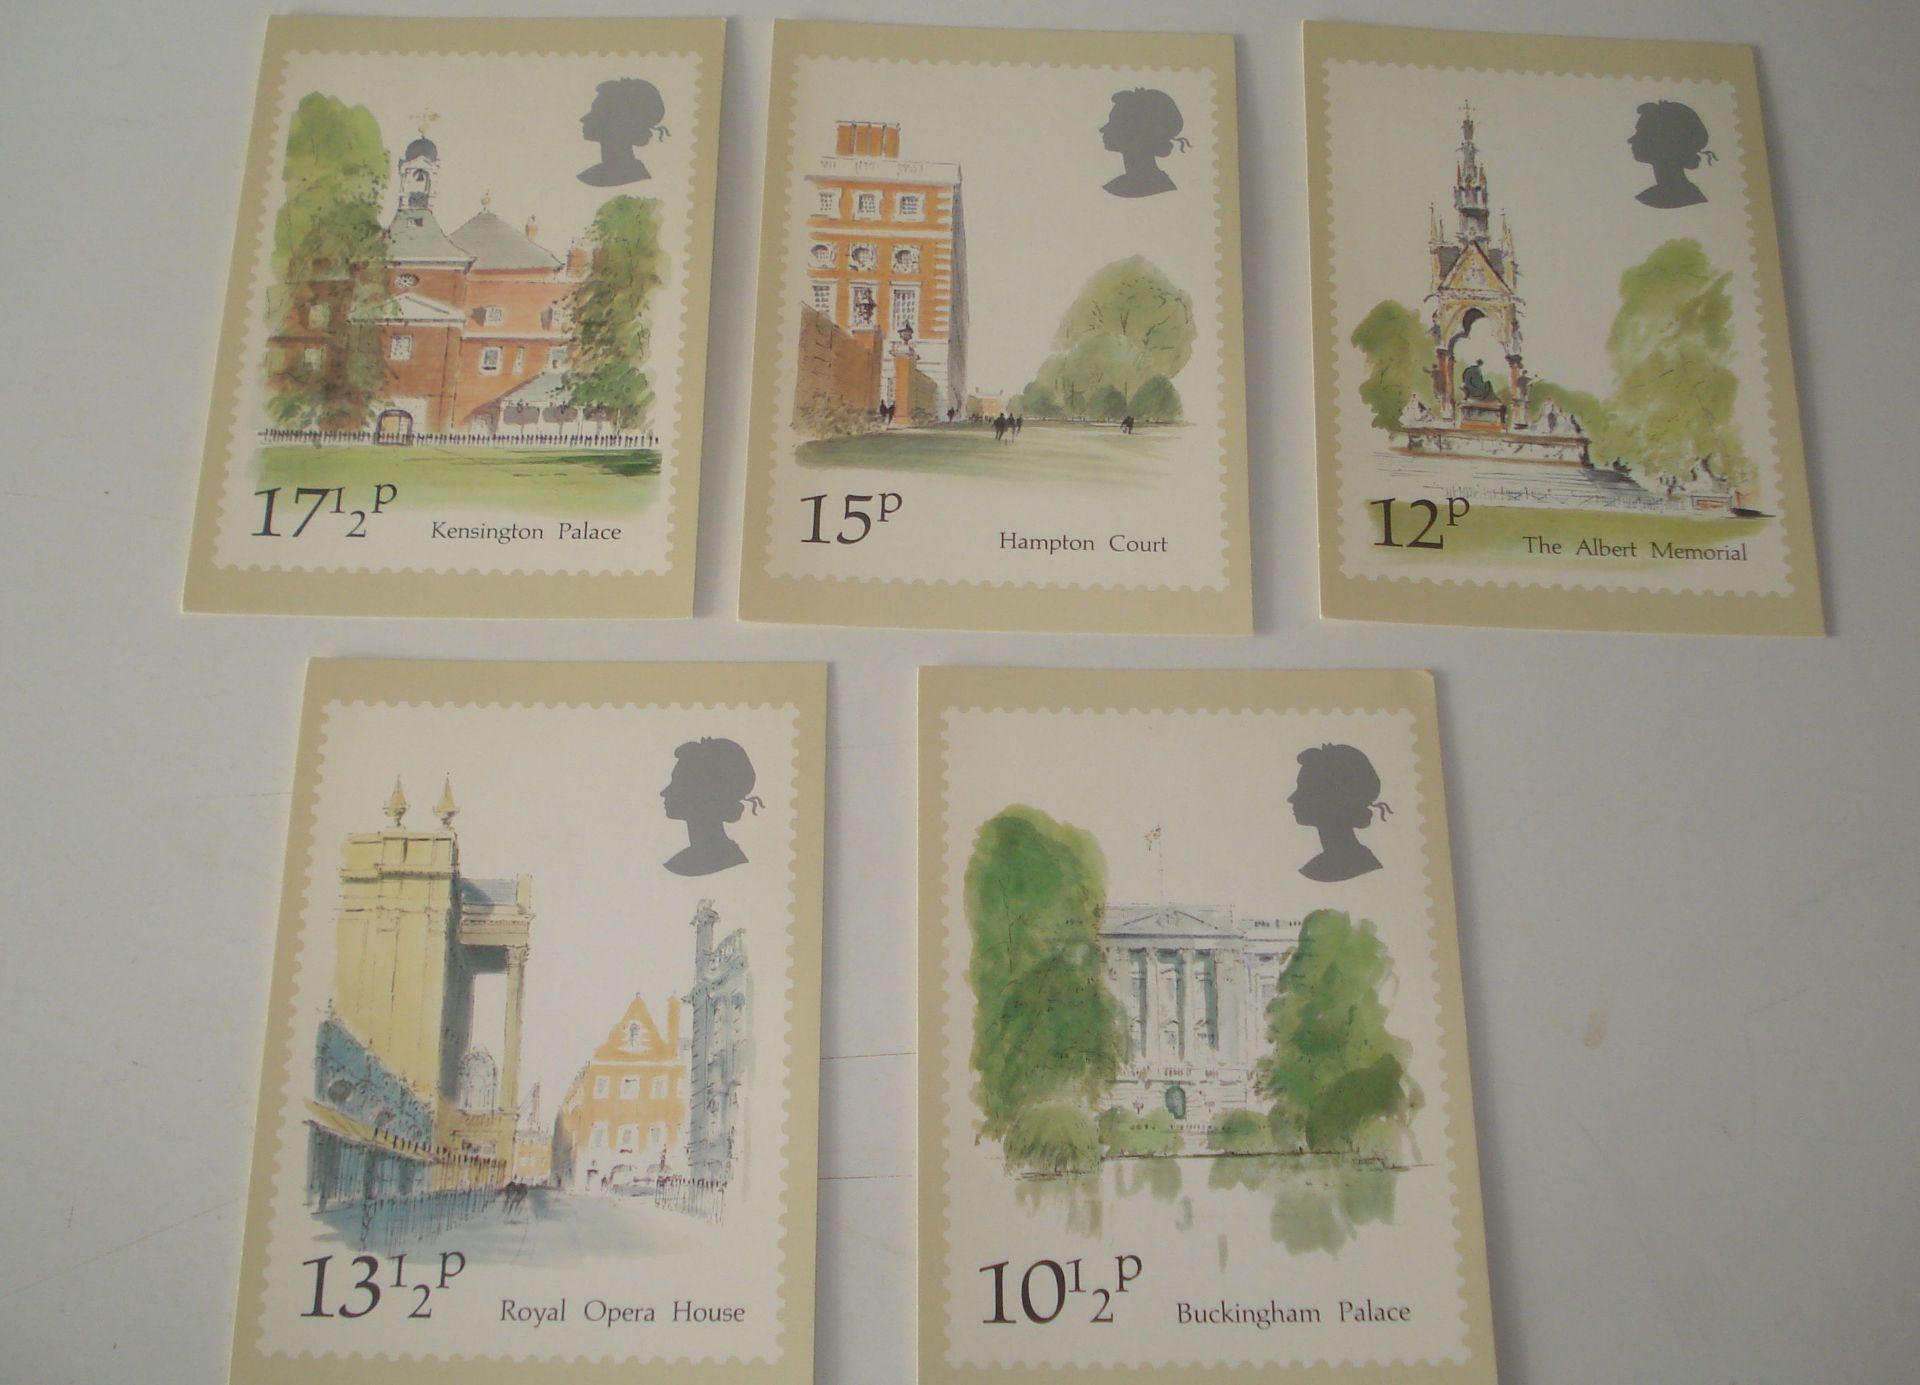 London Landmarks 1980 Post Office Stamp Postcard set with first day issue postmark